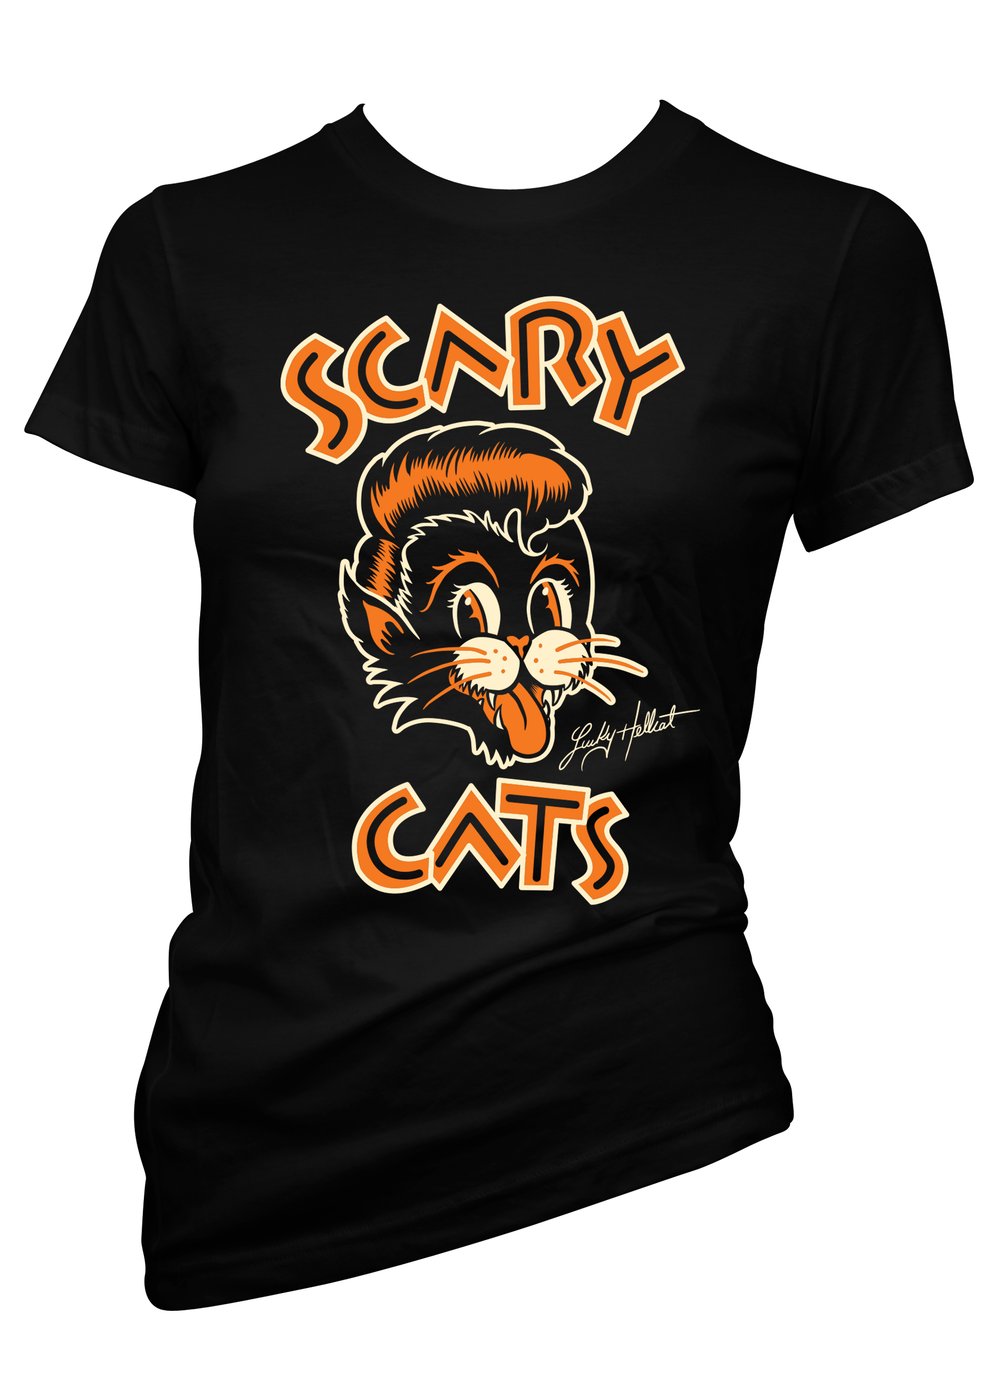 Scary Cats Woman’s T-shirt 